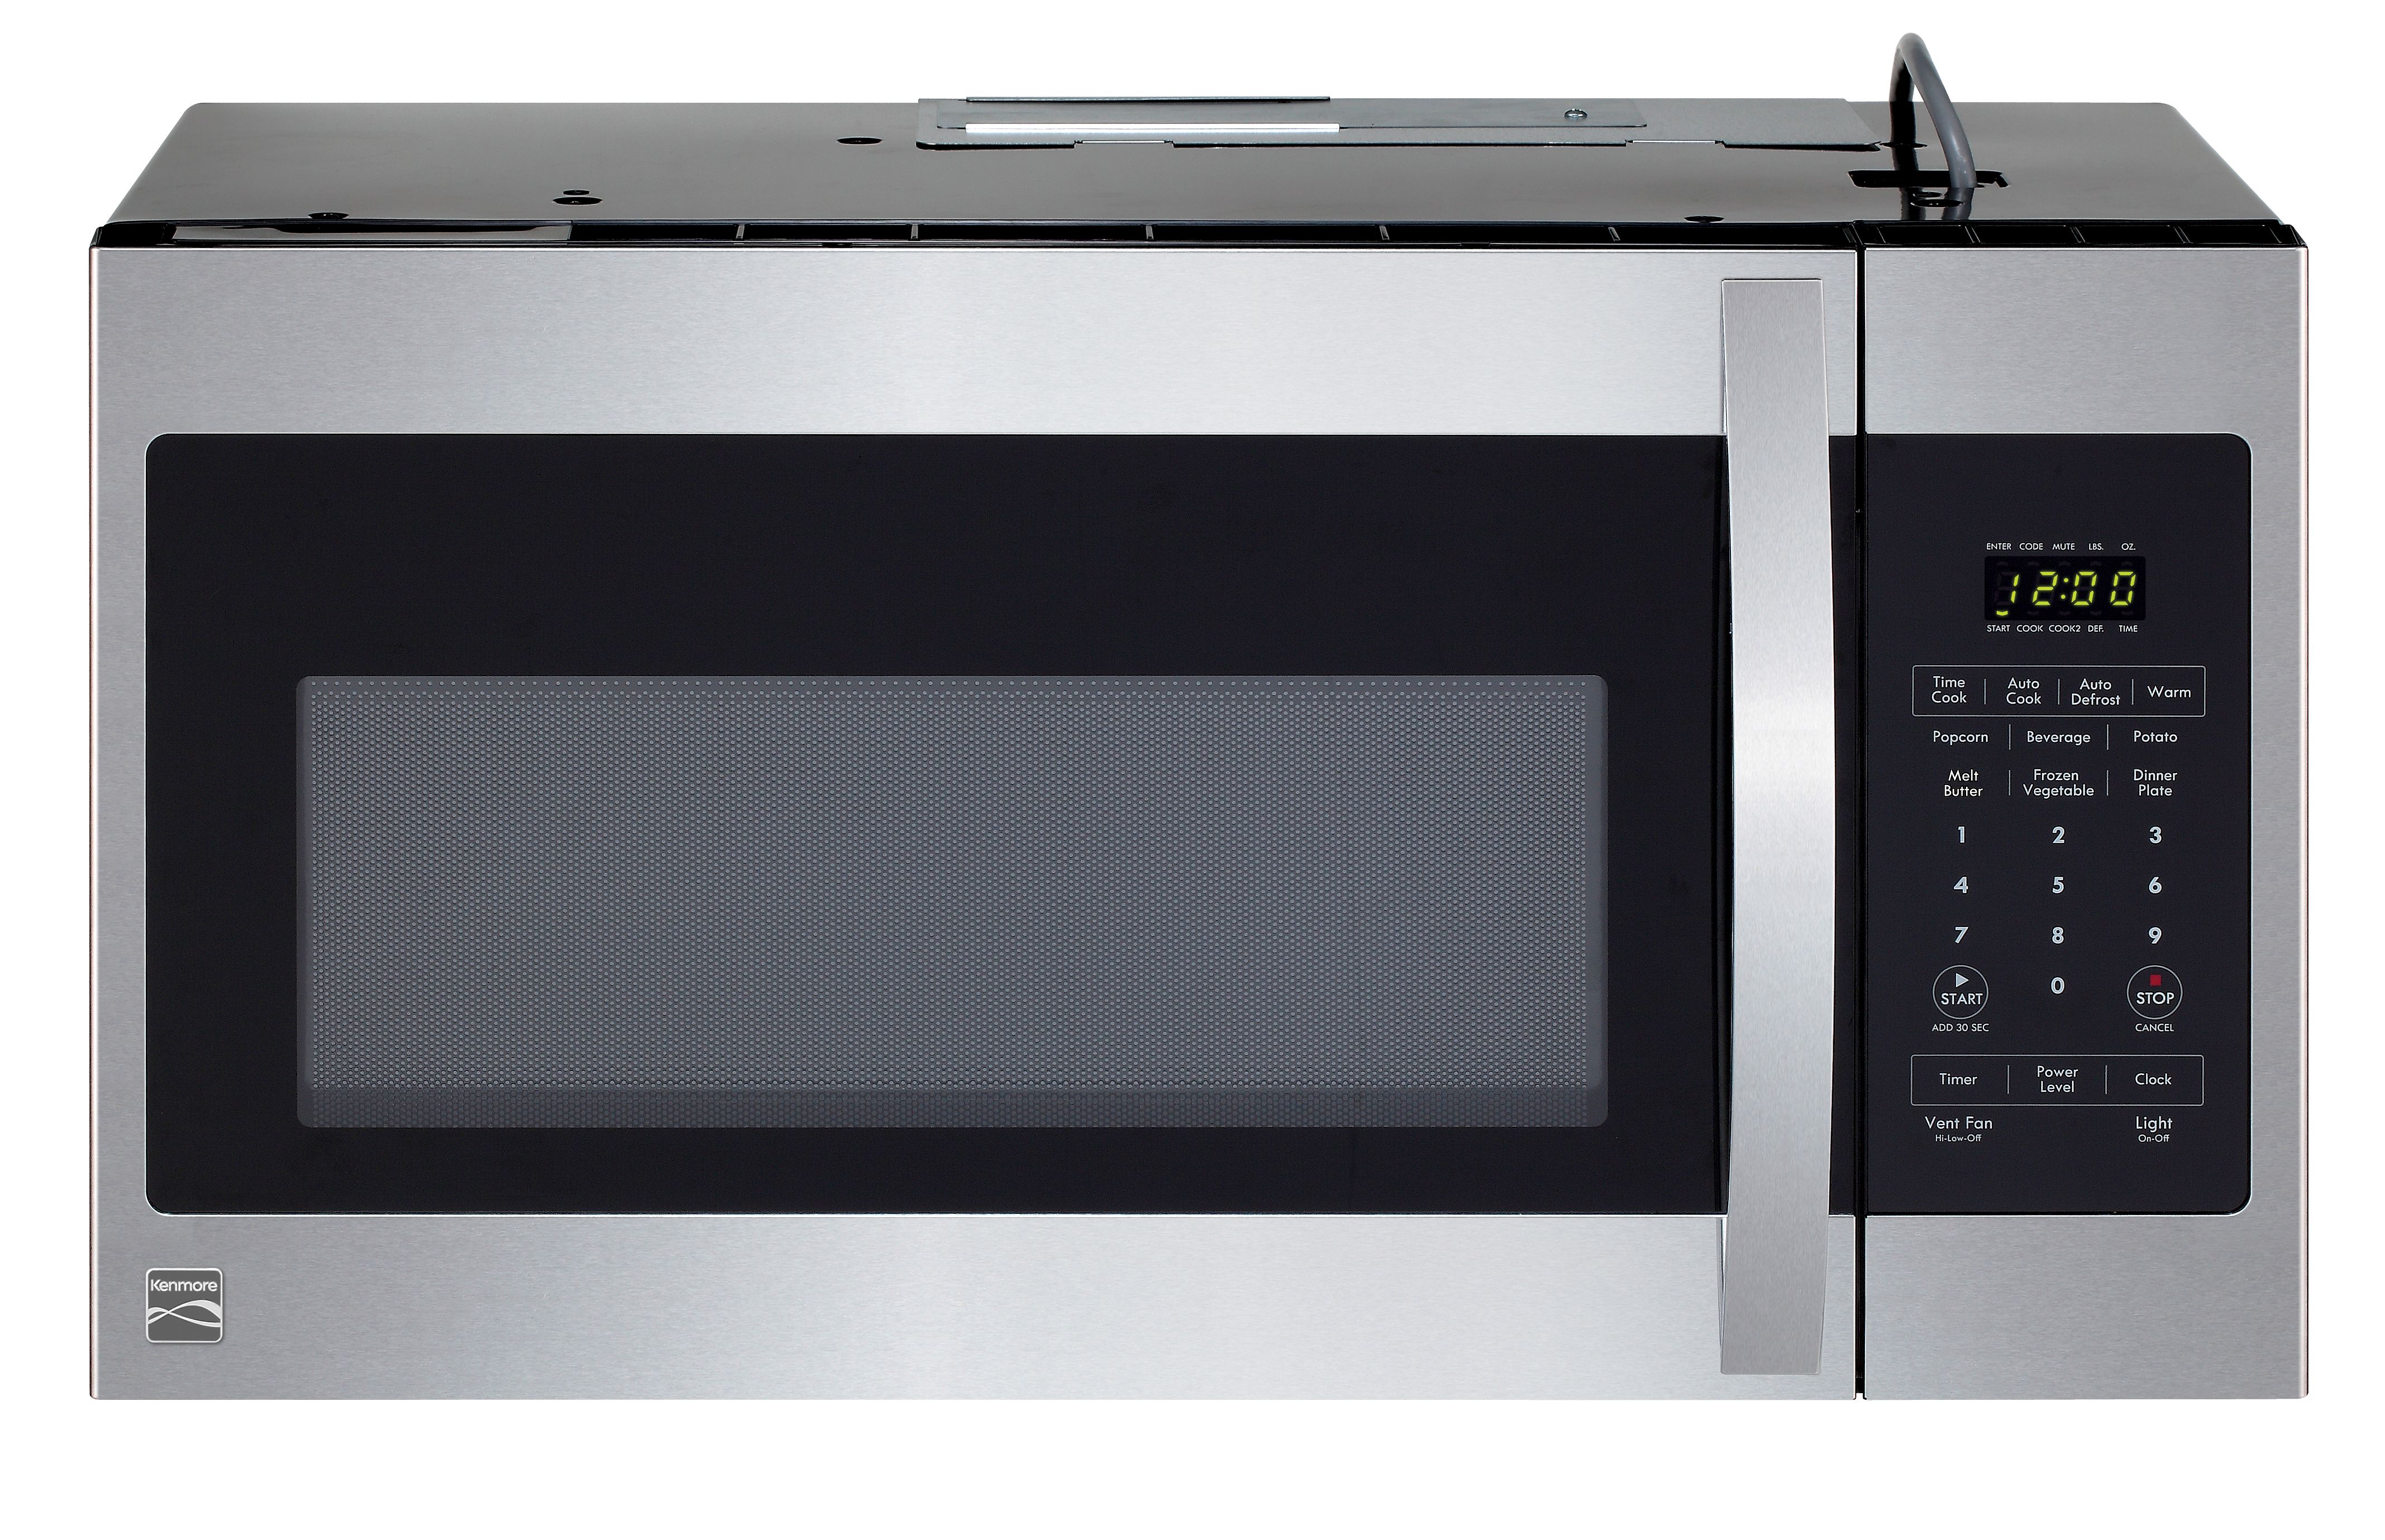 Kenmore 83523 1.6 cu. ft. Over-the-Range Microwave Oven - Stainless